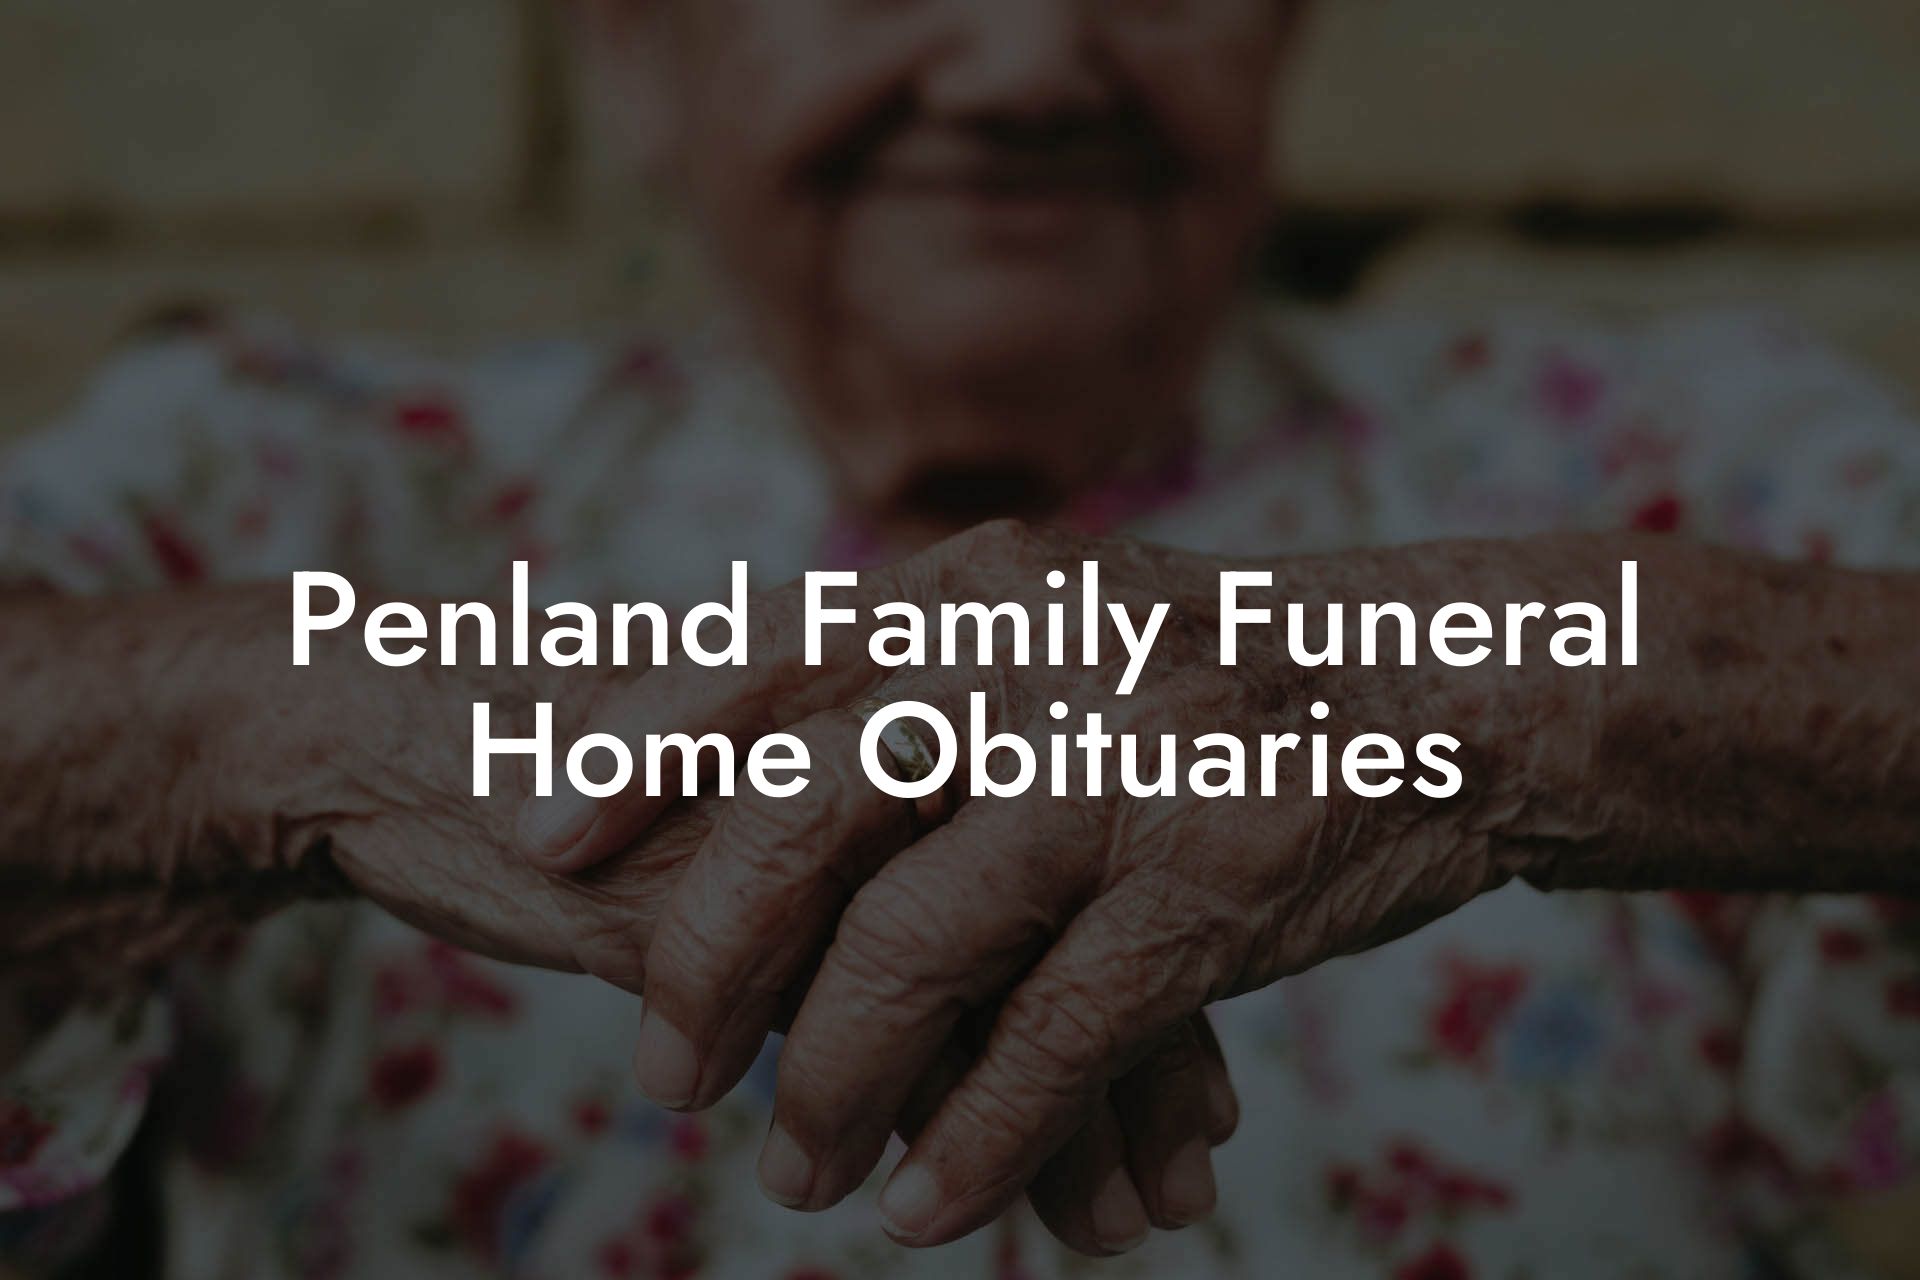 Penland Family Funeral Home Obituaries